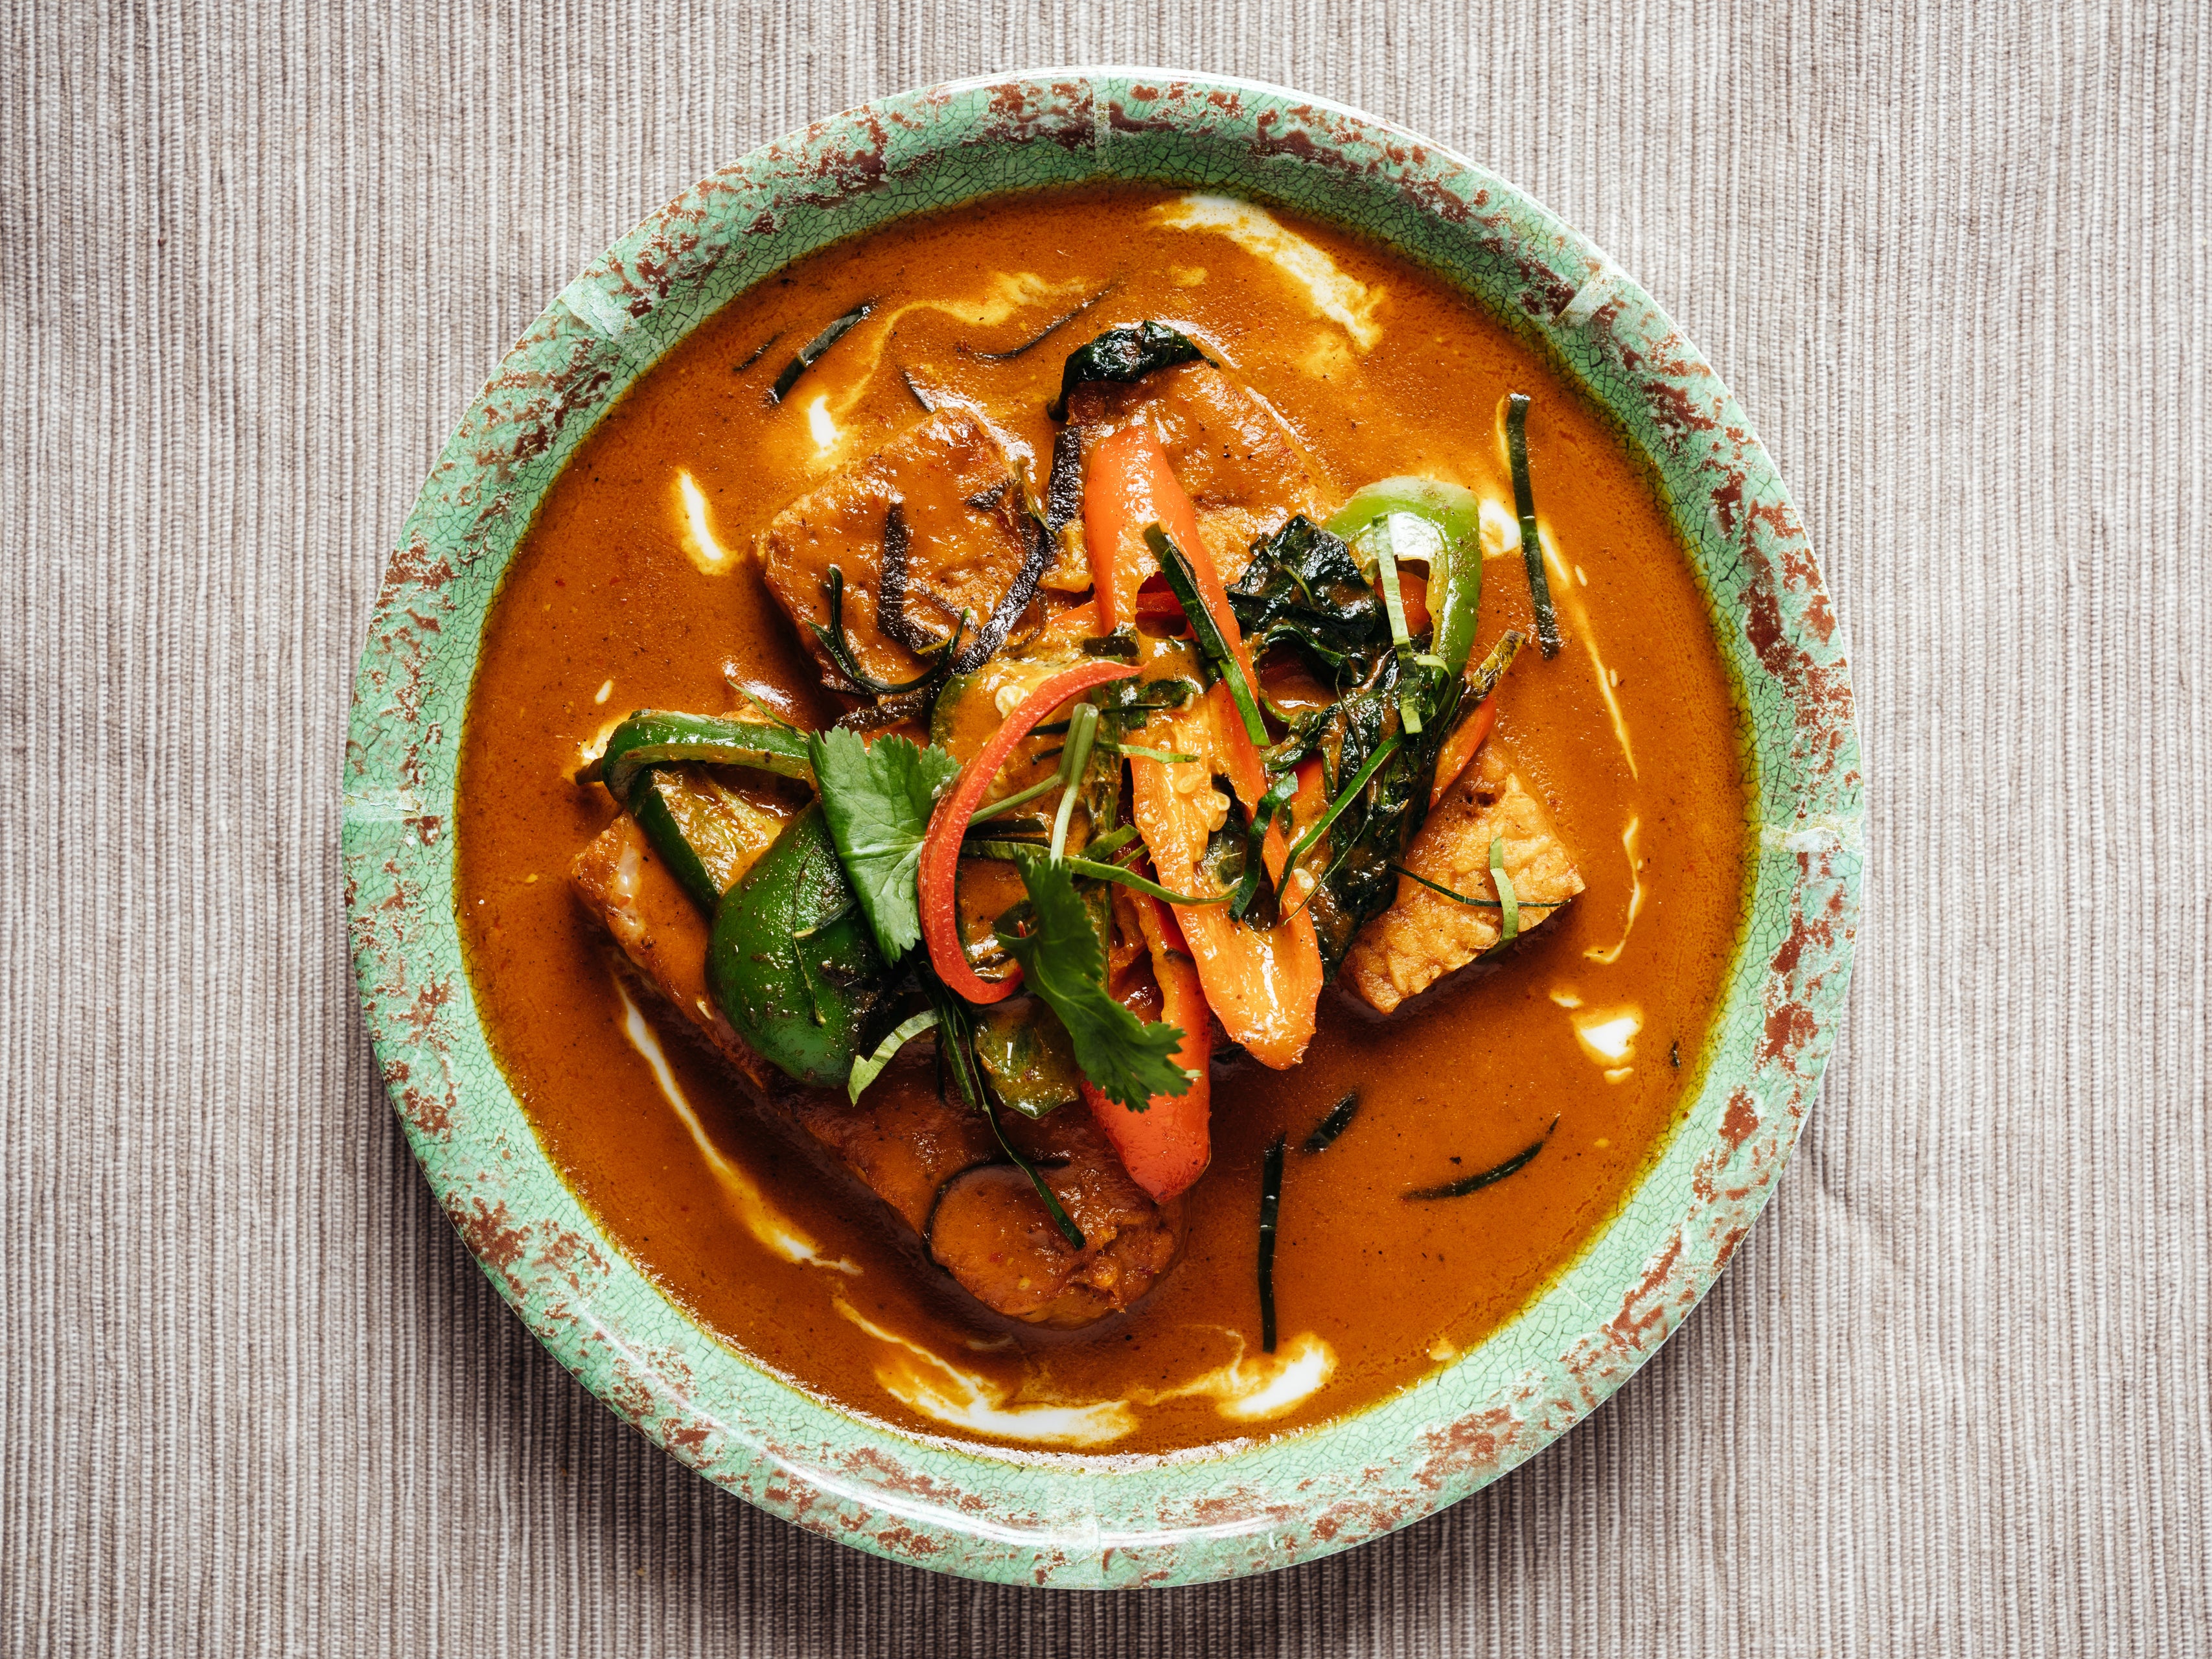 Chu chi curry is typically made with seafood